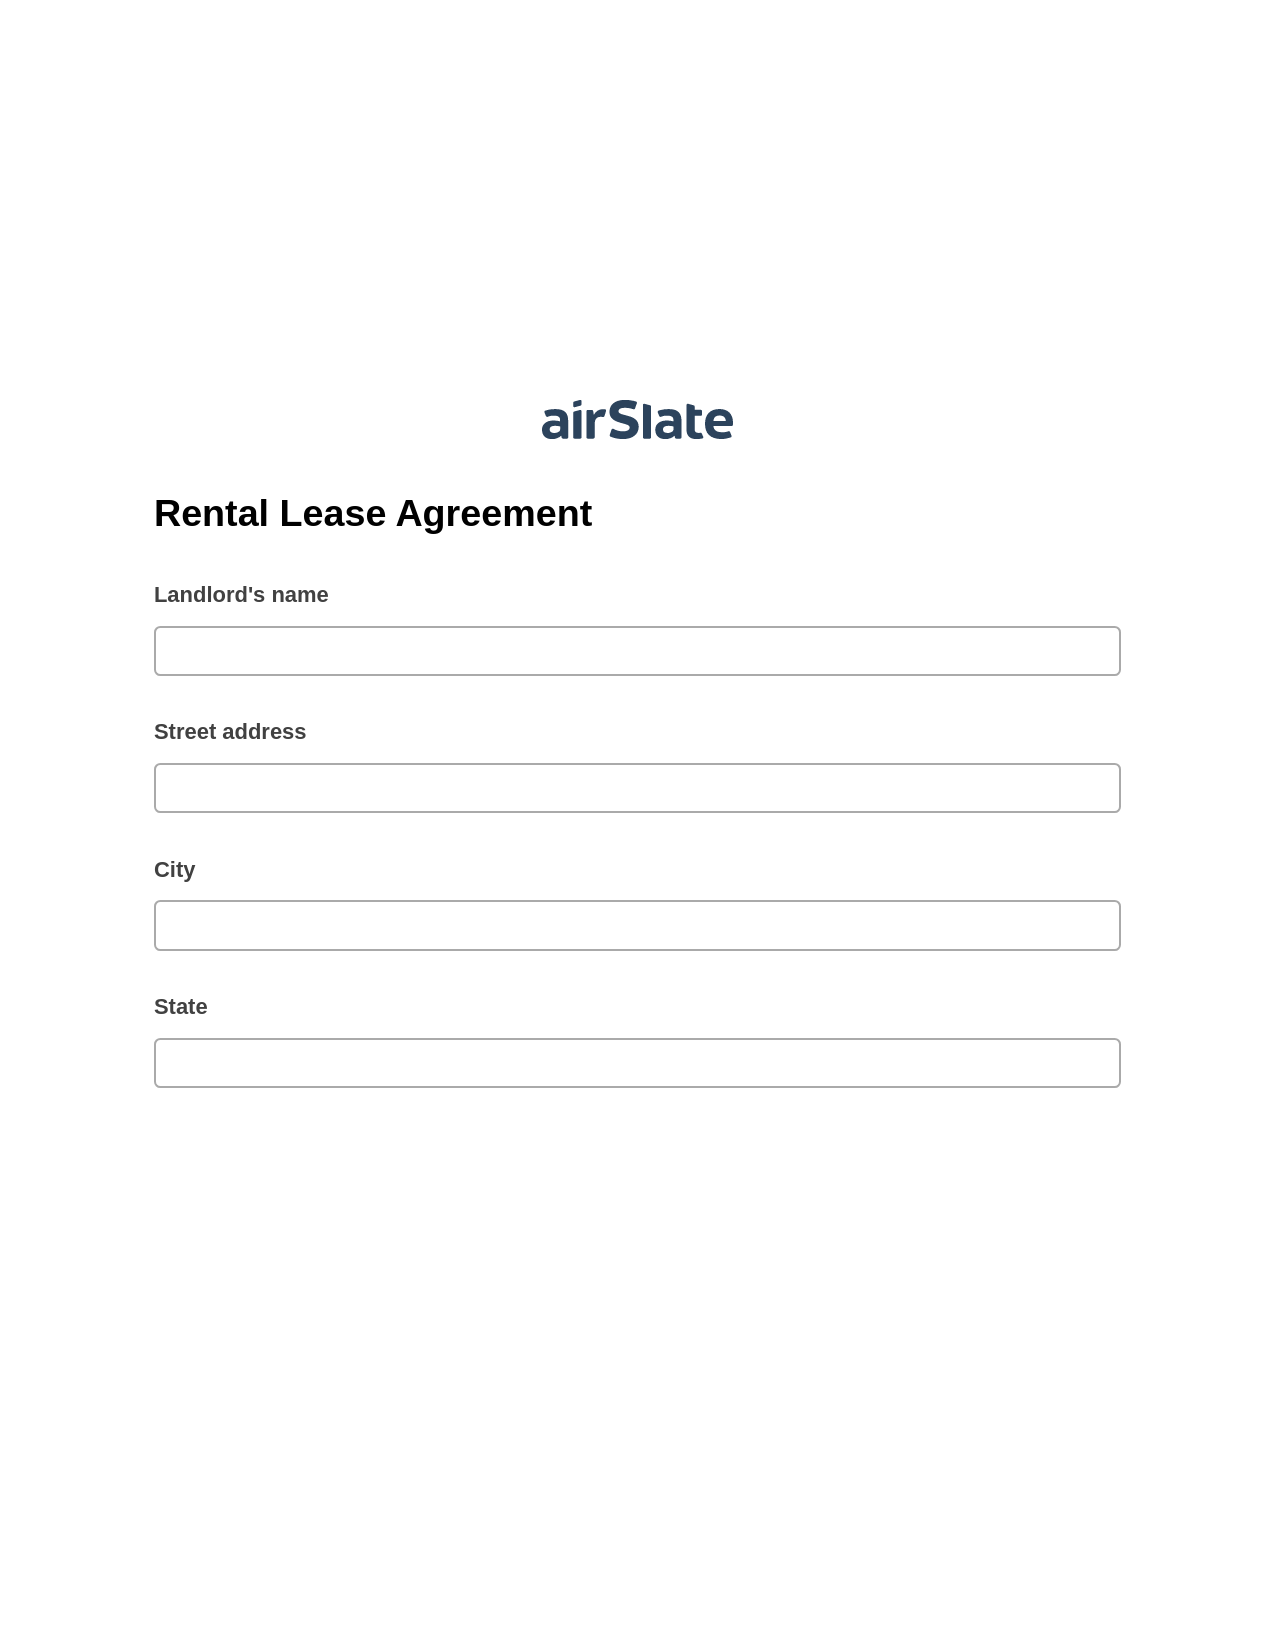 Multirole Rental Lease Agreement Pre-fill from MySQL Dropdown Options Bot, Update NetSuite Records Bot, Export to MySQL Bot